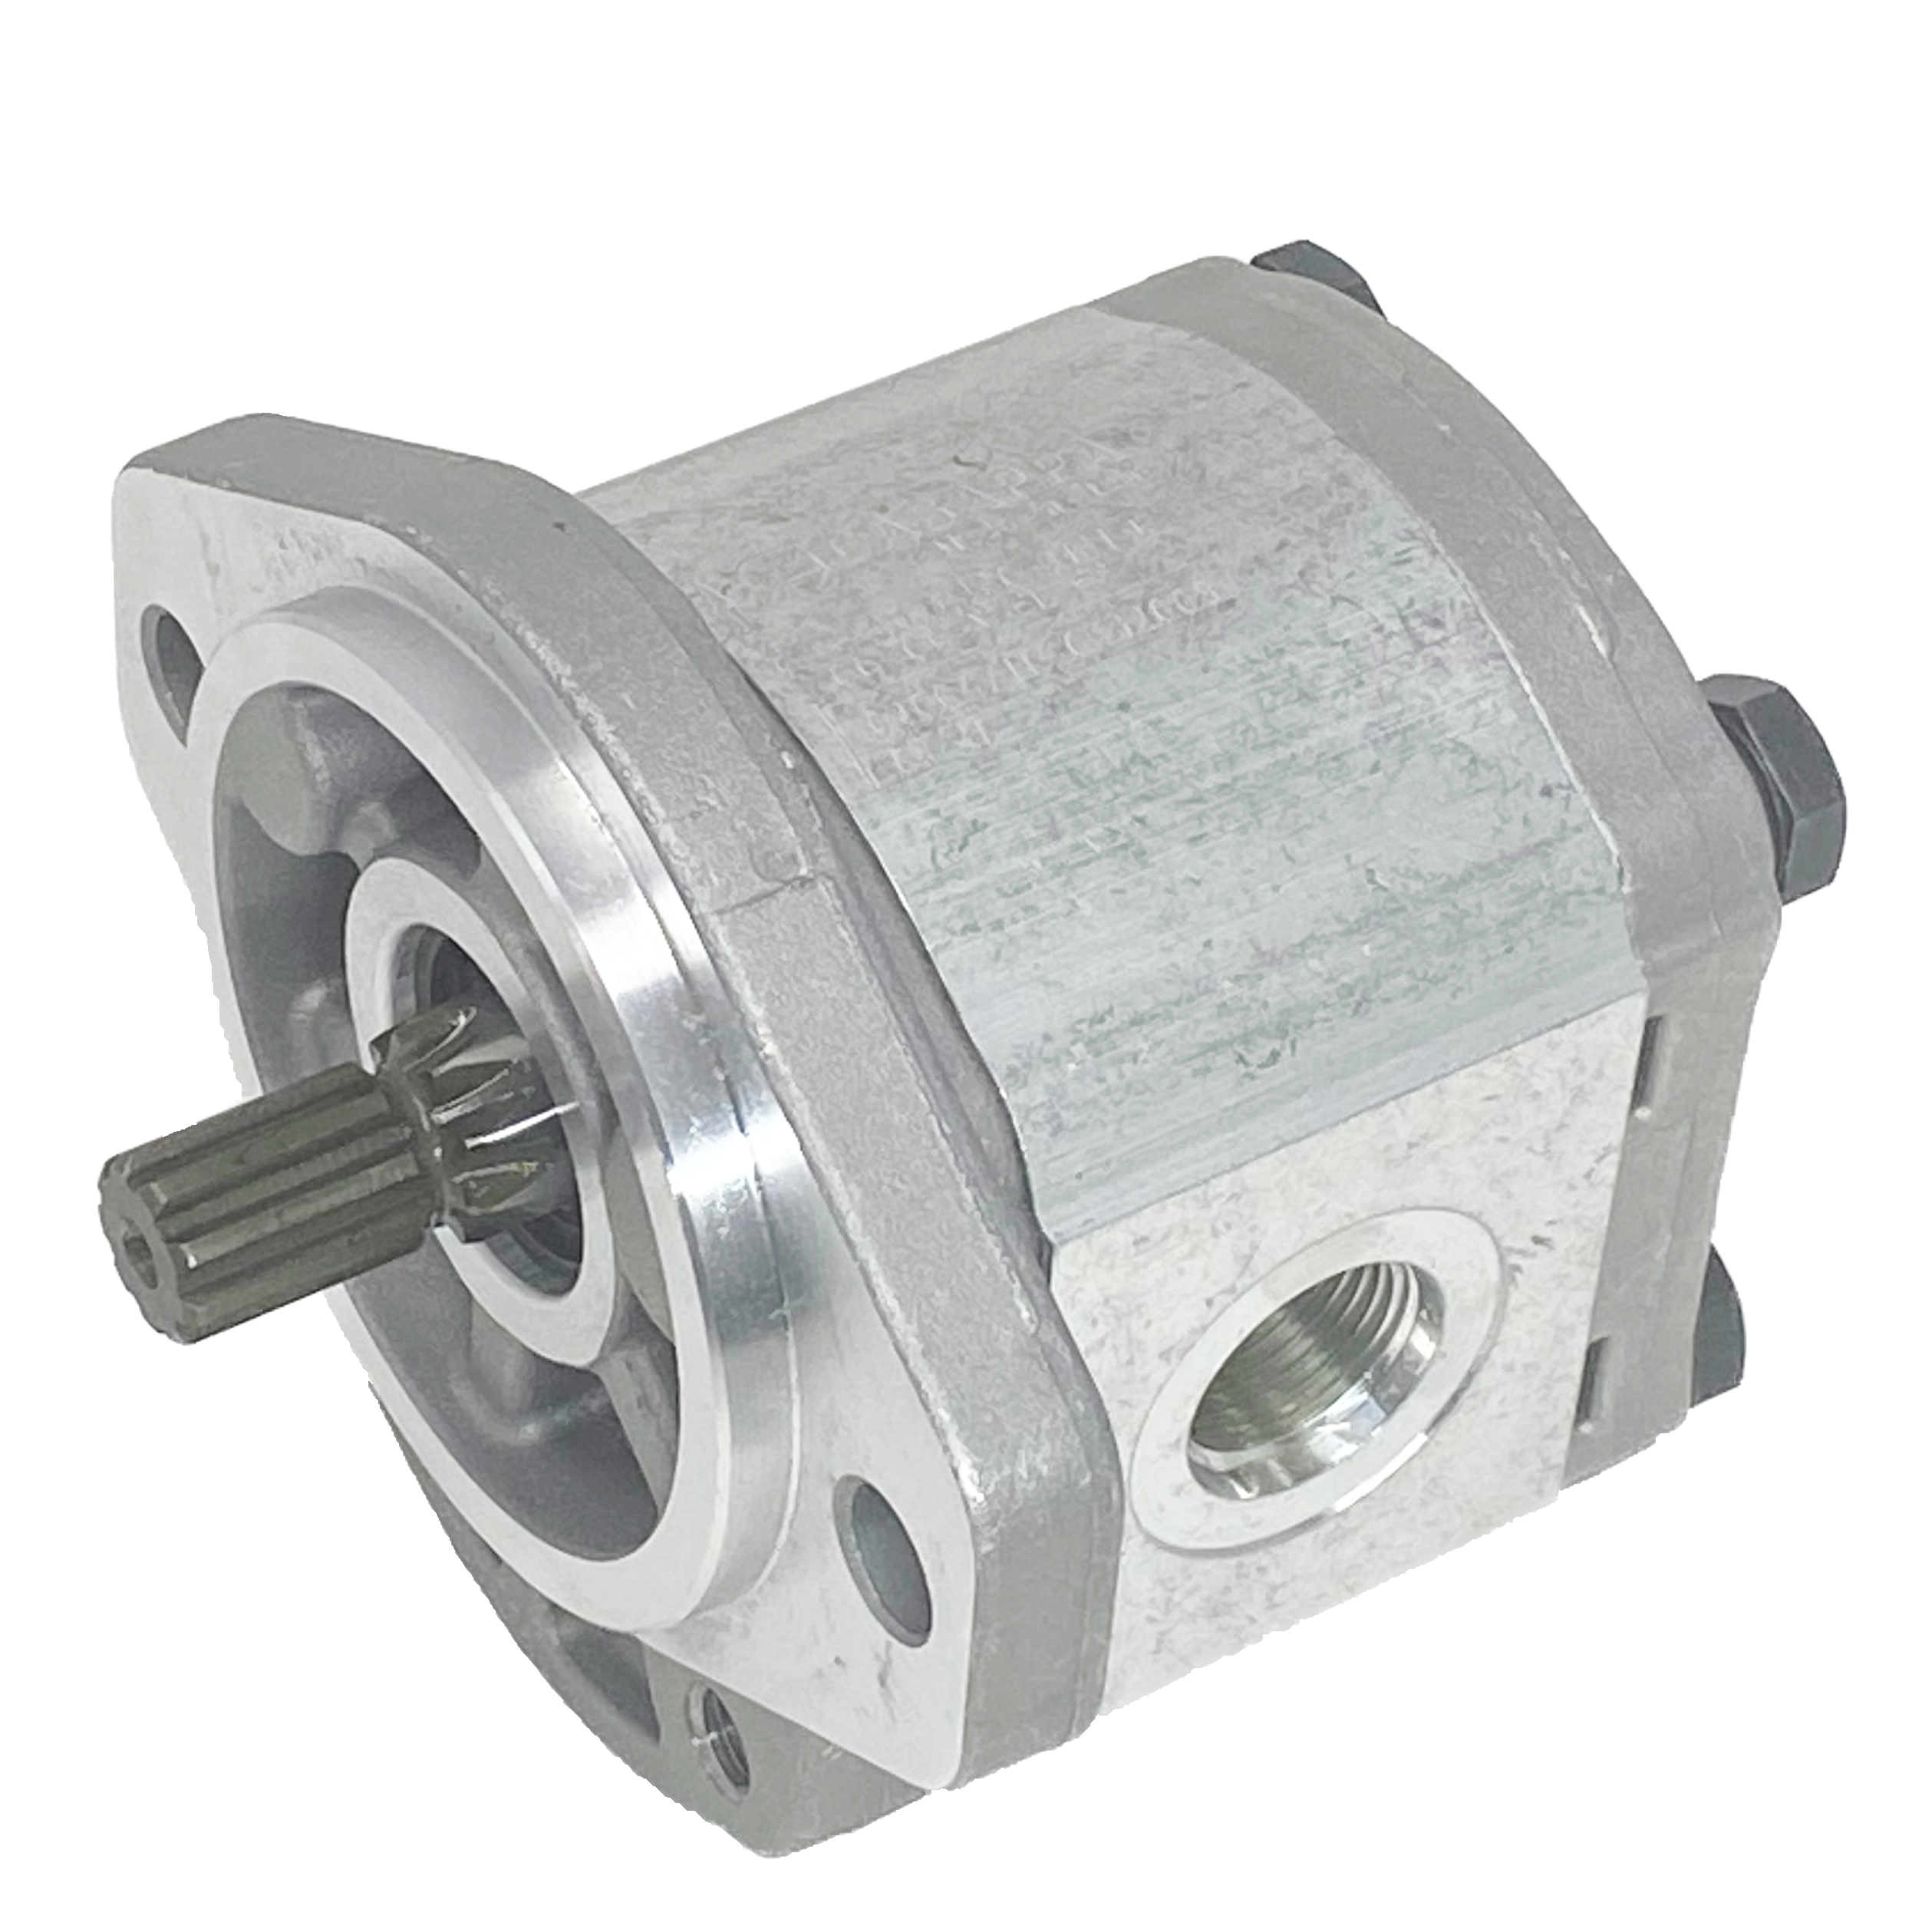 PLP20.6,3S0-31S1-LOF/OC-S7-N-EL-FS : Casappa Polaris Gear Pump, 6.61cc, 3625psi Rated, 4000RPM, CCW, 5/8" Keyed Shaft, SAE A 2-Bolt Flange, 1" #16 SAE Inlet, 0.625 (5/8") #10 SAE Outlet, Aluminum Body & Flange